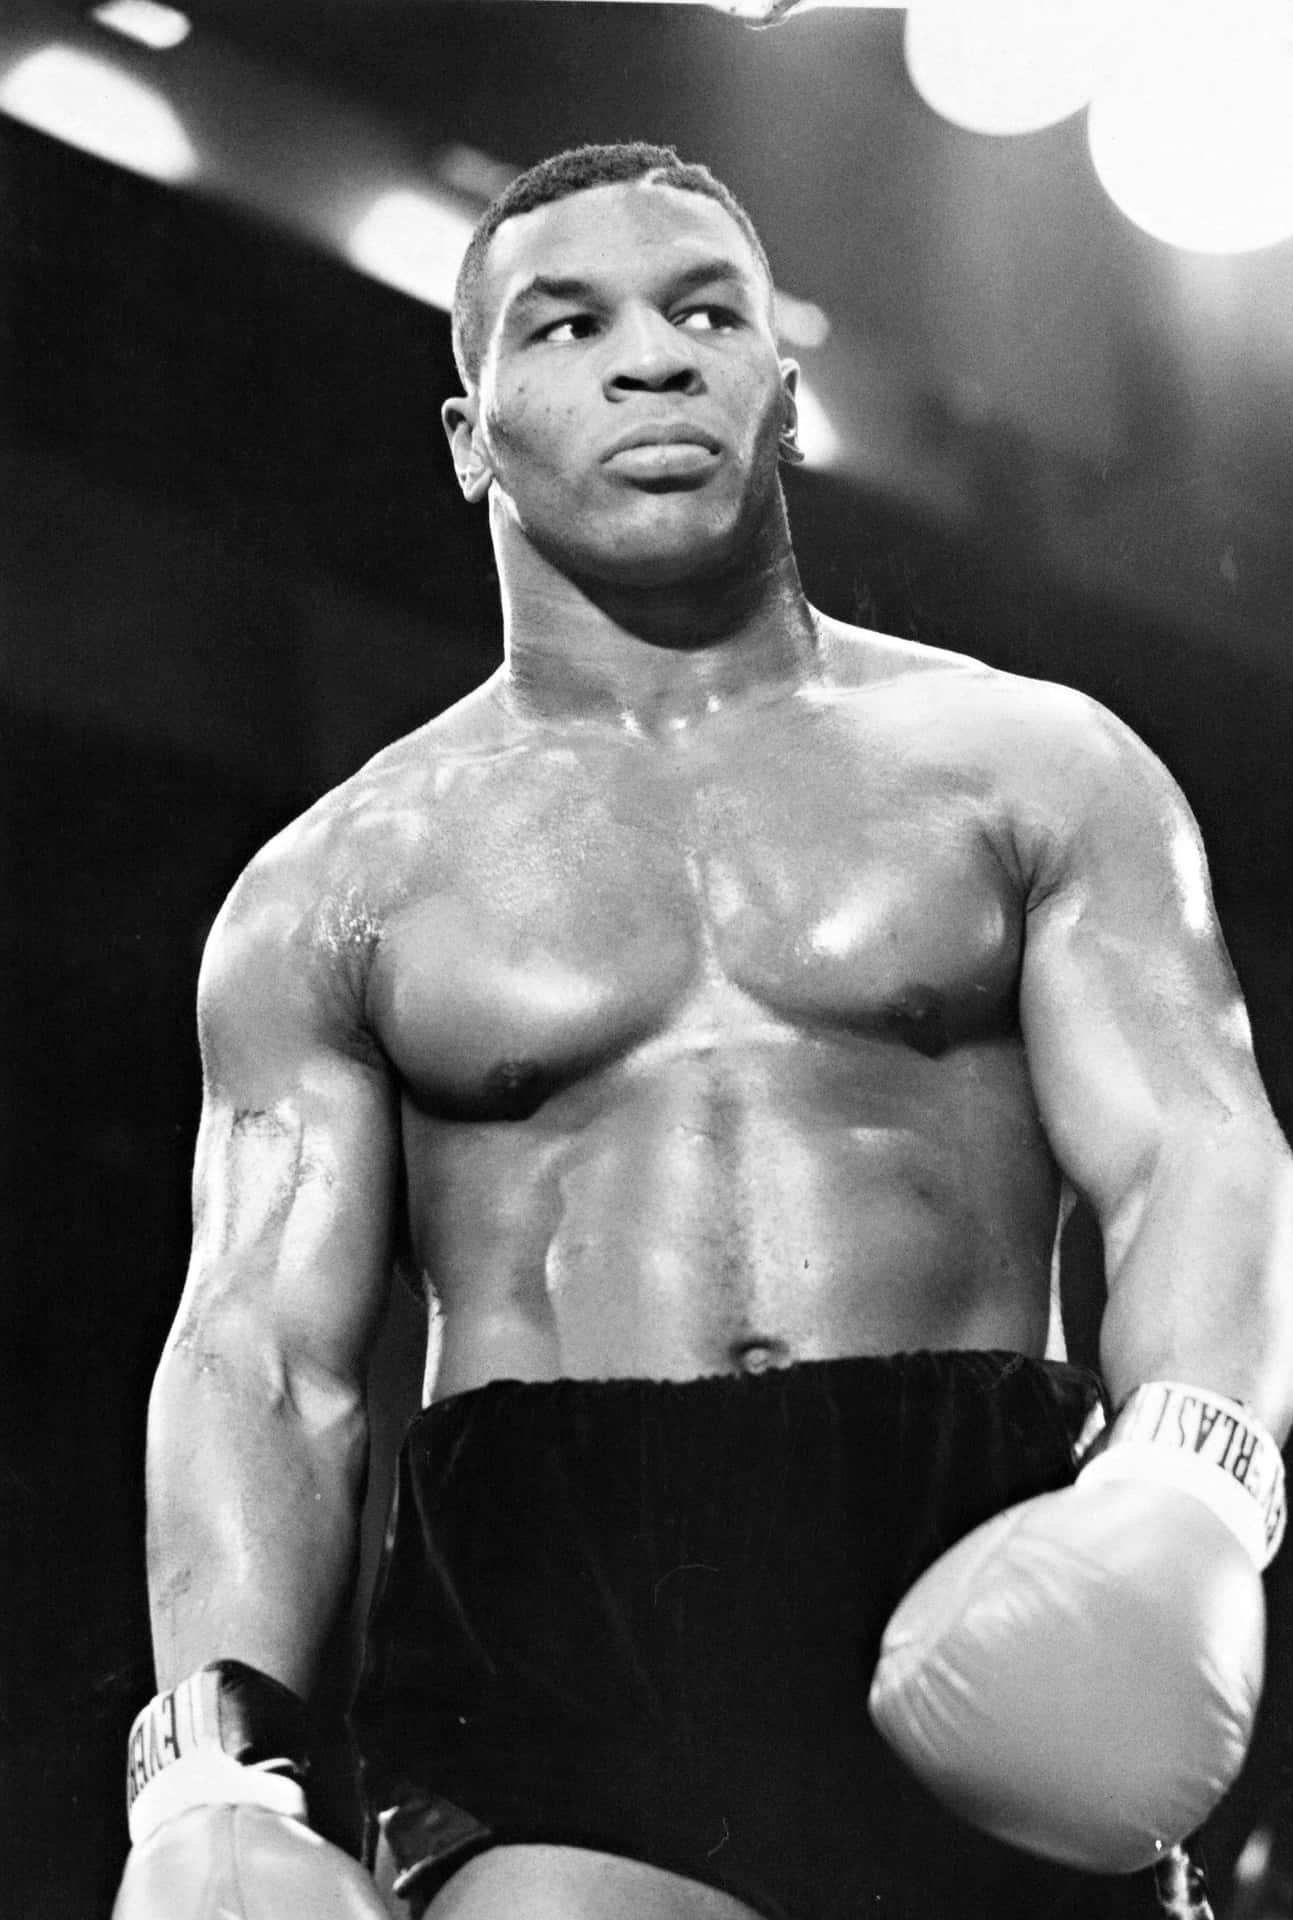 A determined Mike Tyson, ready to fight